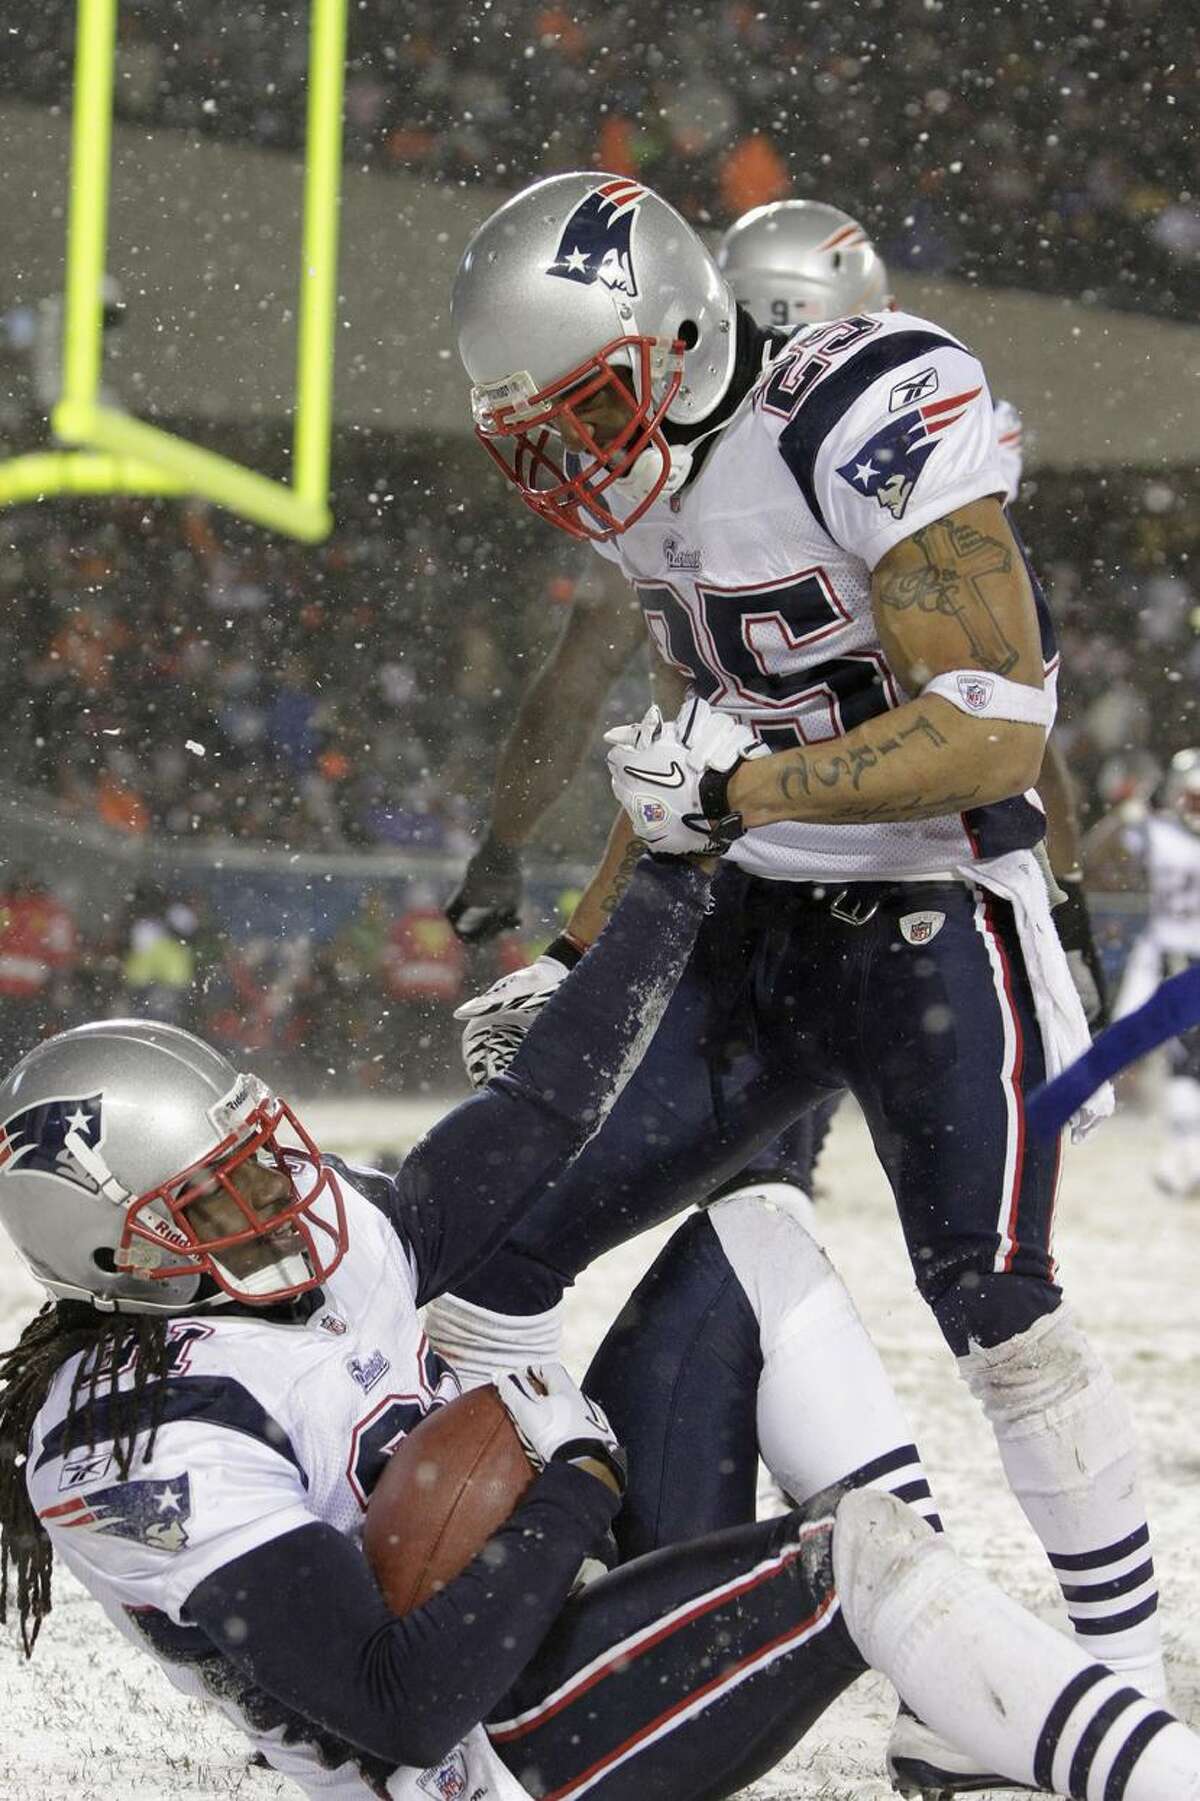 New England Patriots safety Brandon Meriweather (31) celebrates his interception in the end zone with teammate Pat Chung (25) in the second half of an NFL football gameagainst the Chicago Bears in Chicago, Sunday, Dec. 12, 2010. The Patriots won 36-7. (AP Photo/Nam Y. Huh)